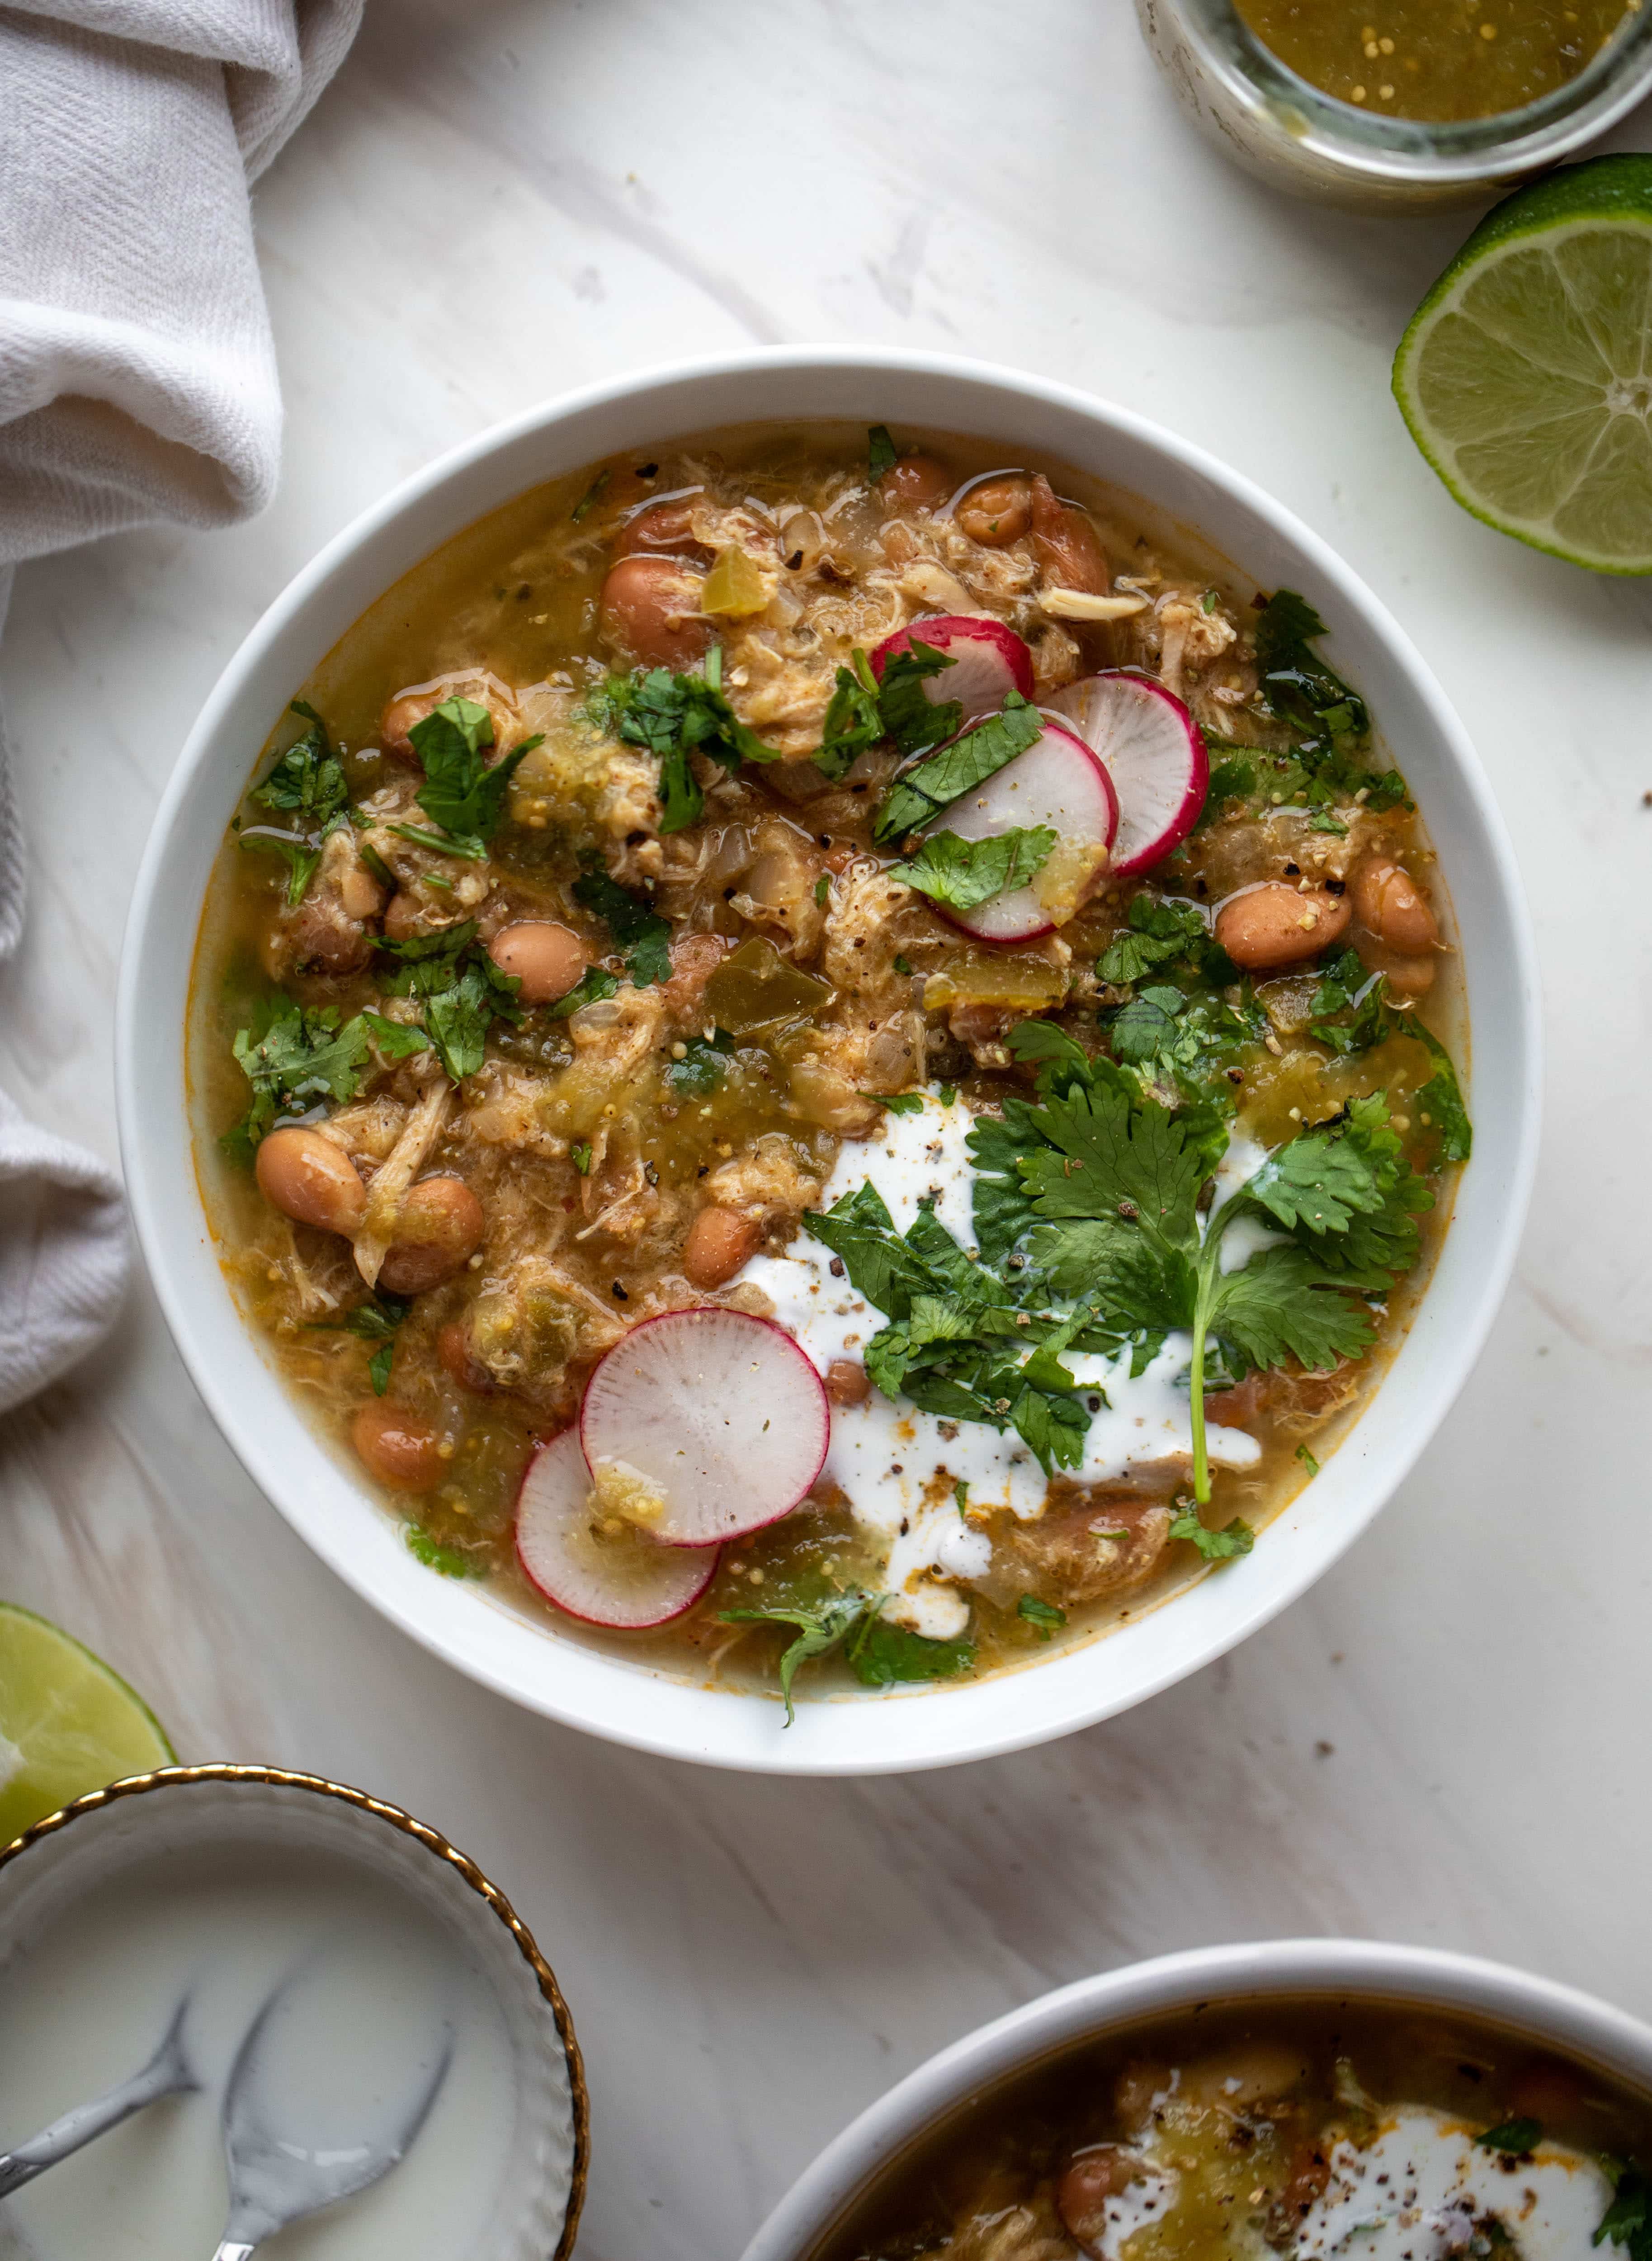 This chicken verde soup is easy to make and comes together quickly. It's served with salted yogurt dolloped on top and it's delish!